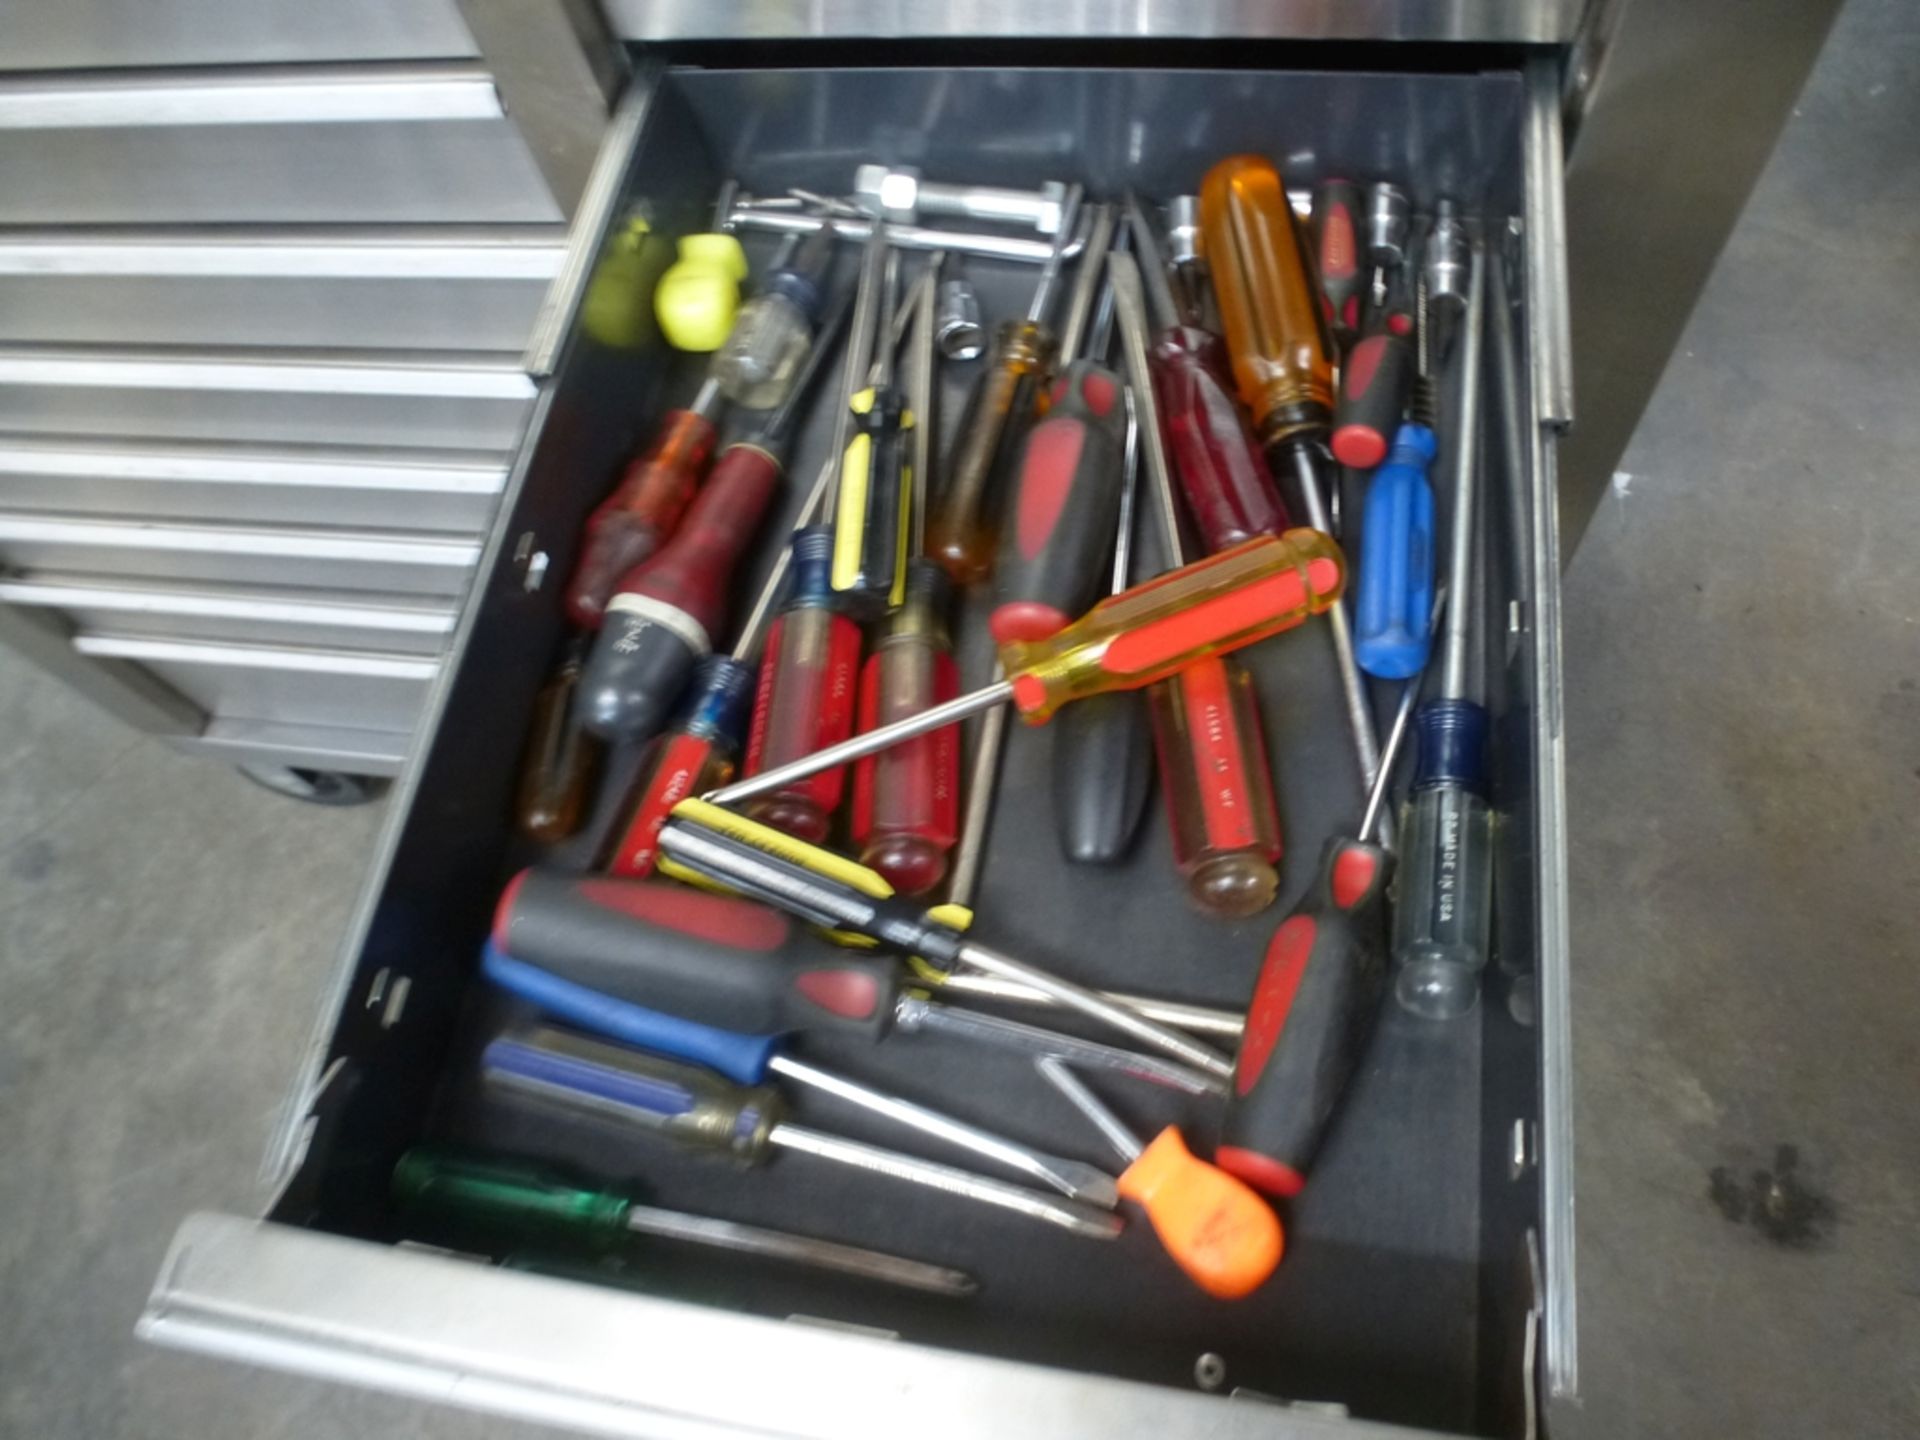 Toolbox w/ Tremendous Amount of Tools - North Spartanburg, SC - Image 17 of 31